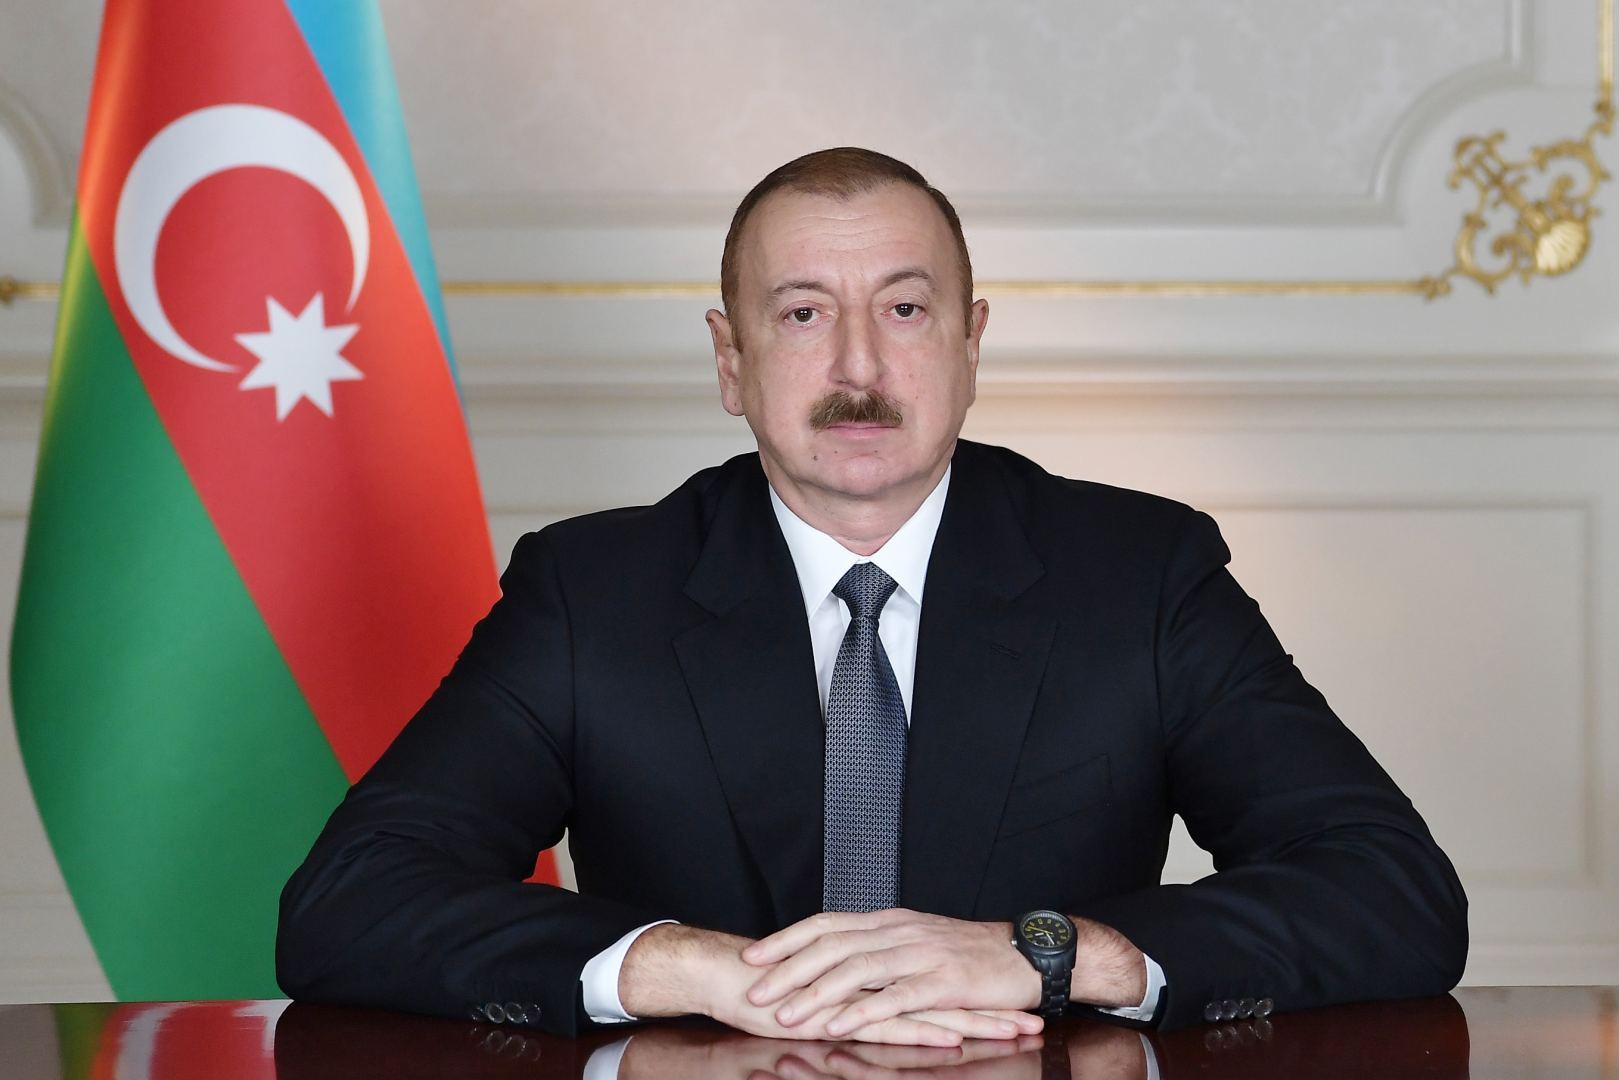 Latest statements and actions taken by U.S. seriously damaged Azerbaijan-U.S. relations - President Ilham Aliyev